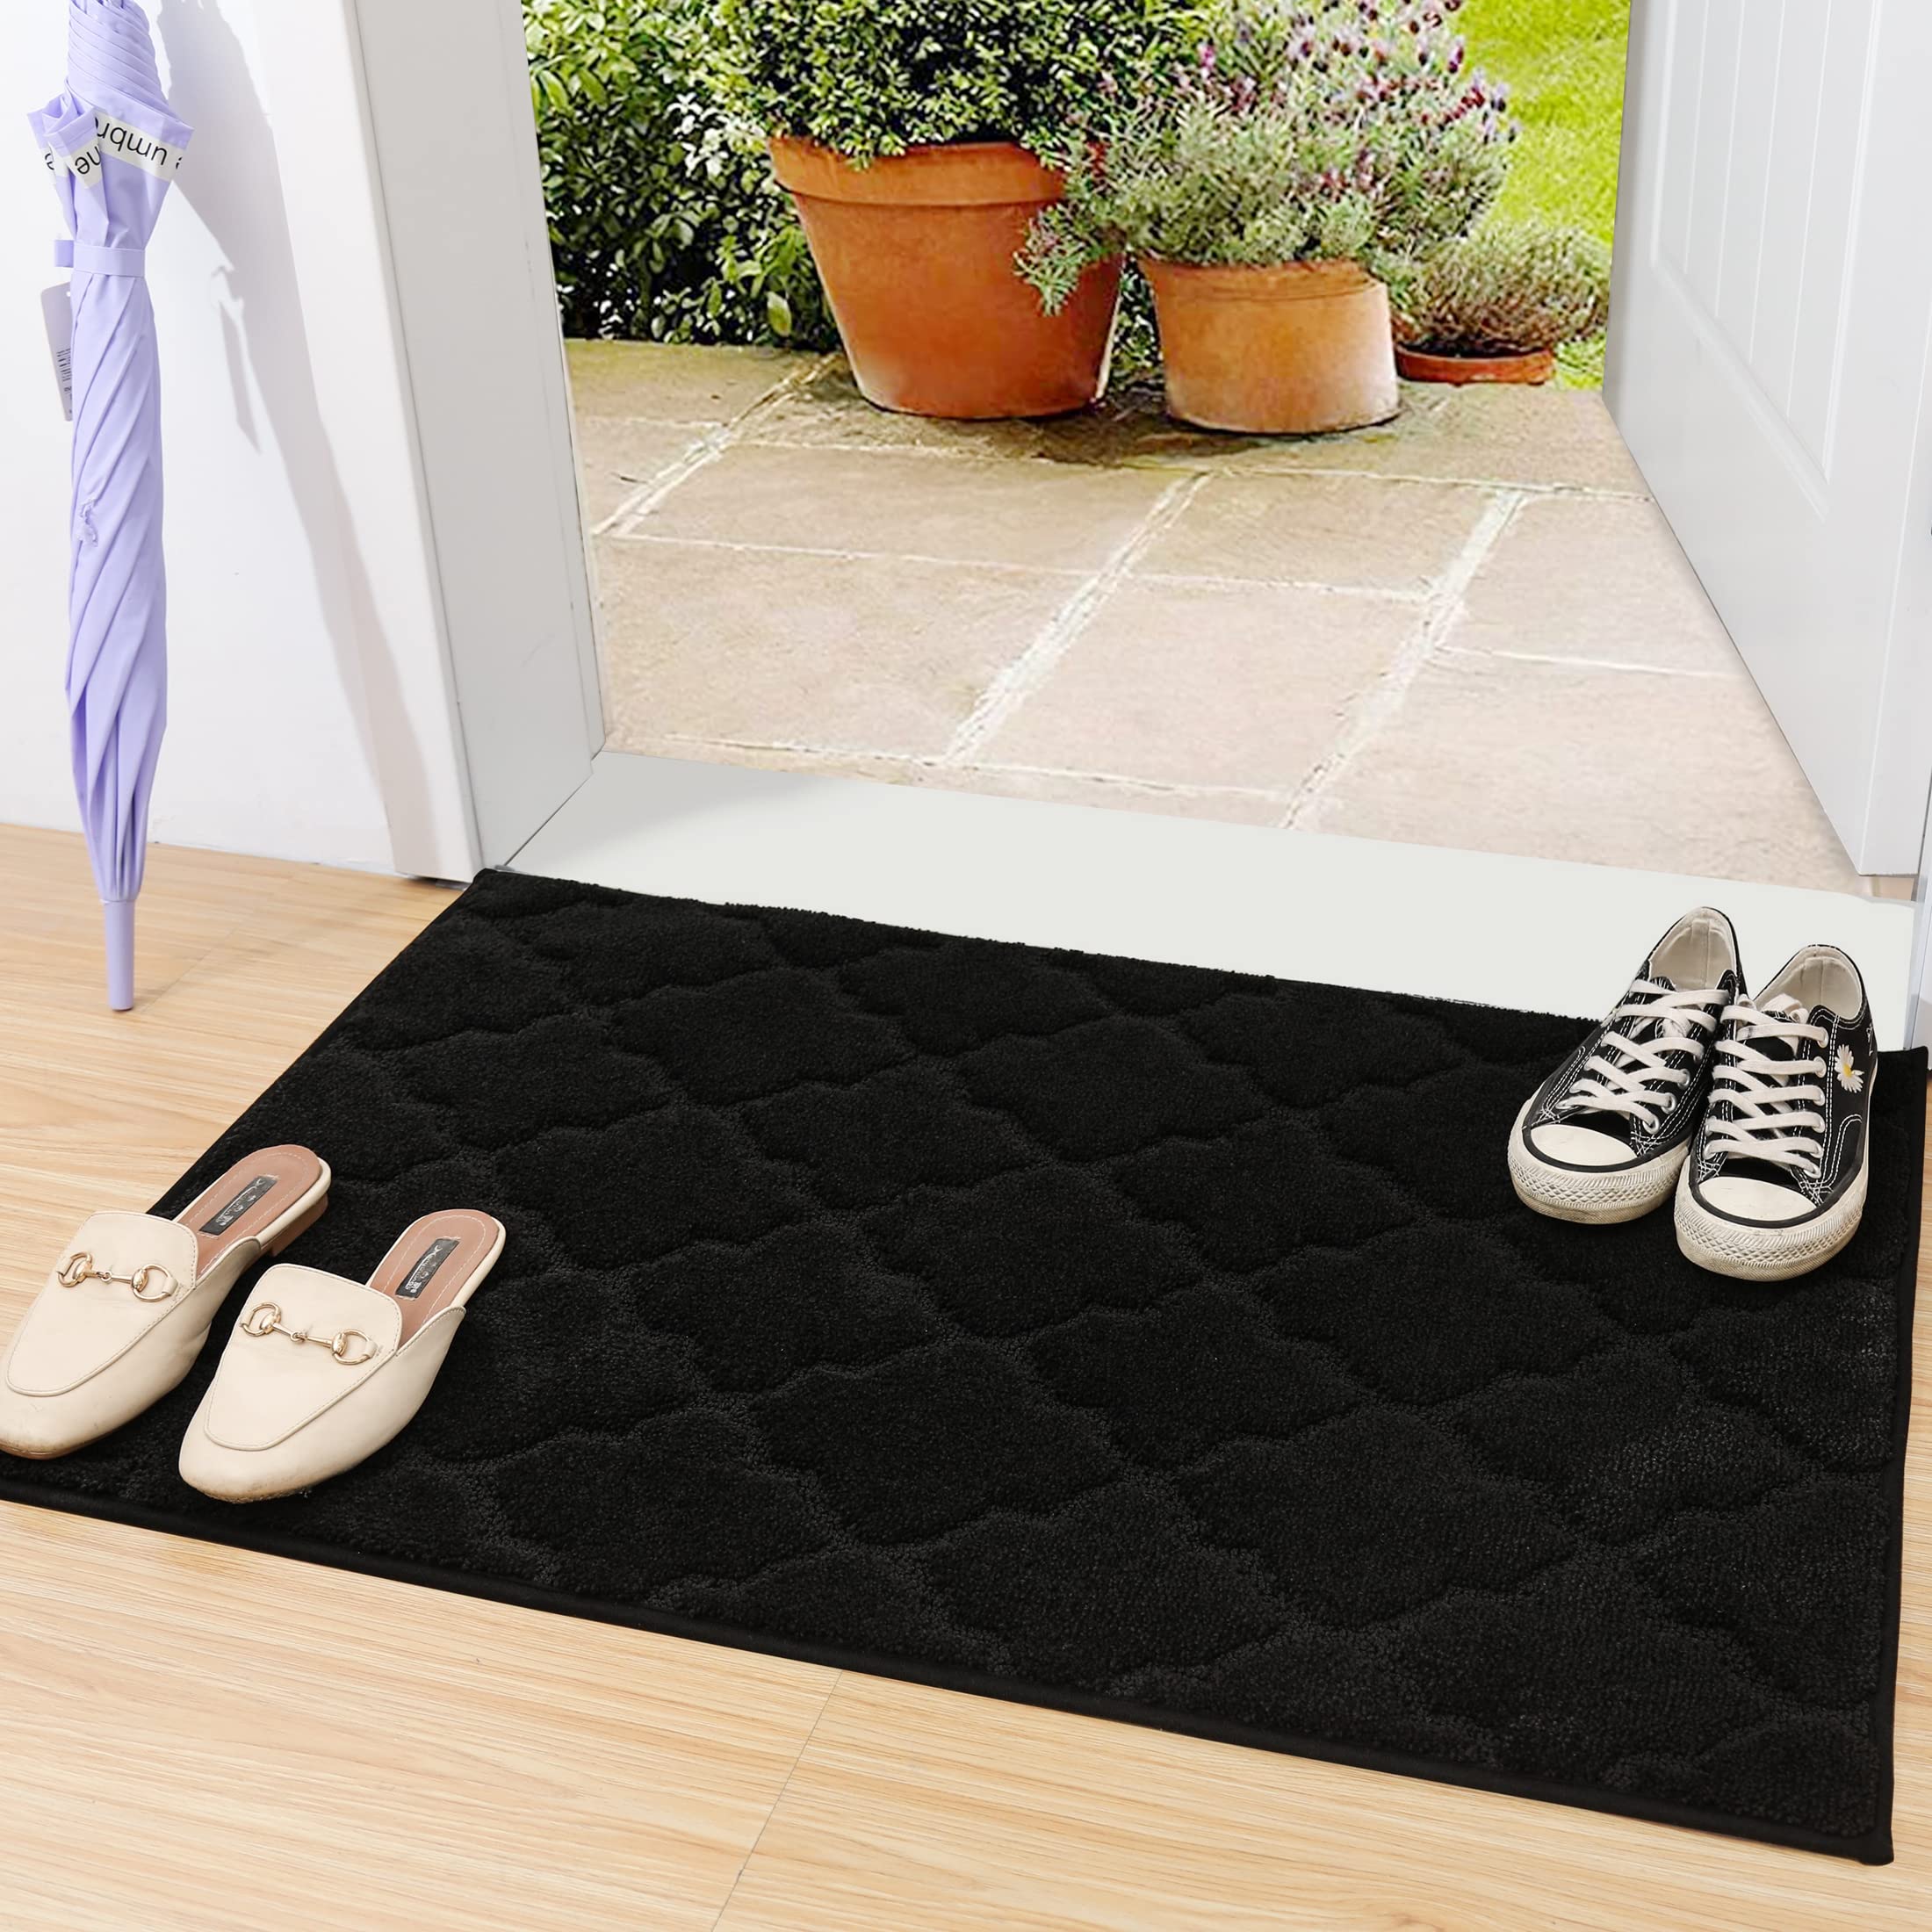 COSY HOMEER Indoor Door Mat Floor Mats Dirt Trapper Rug Wet Shoes and Paws, Front Door Outside Entry Welcome Outdoor Entrance Dog Cat Rugs, Anti Slip Machine Washable,20"x32",Black